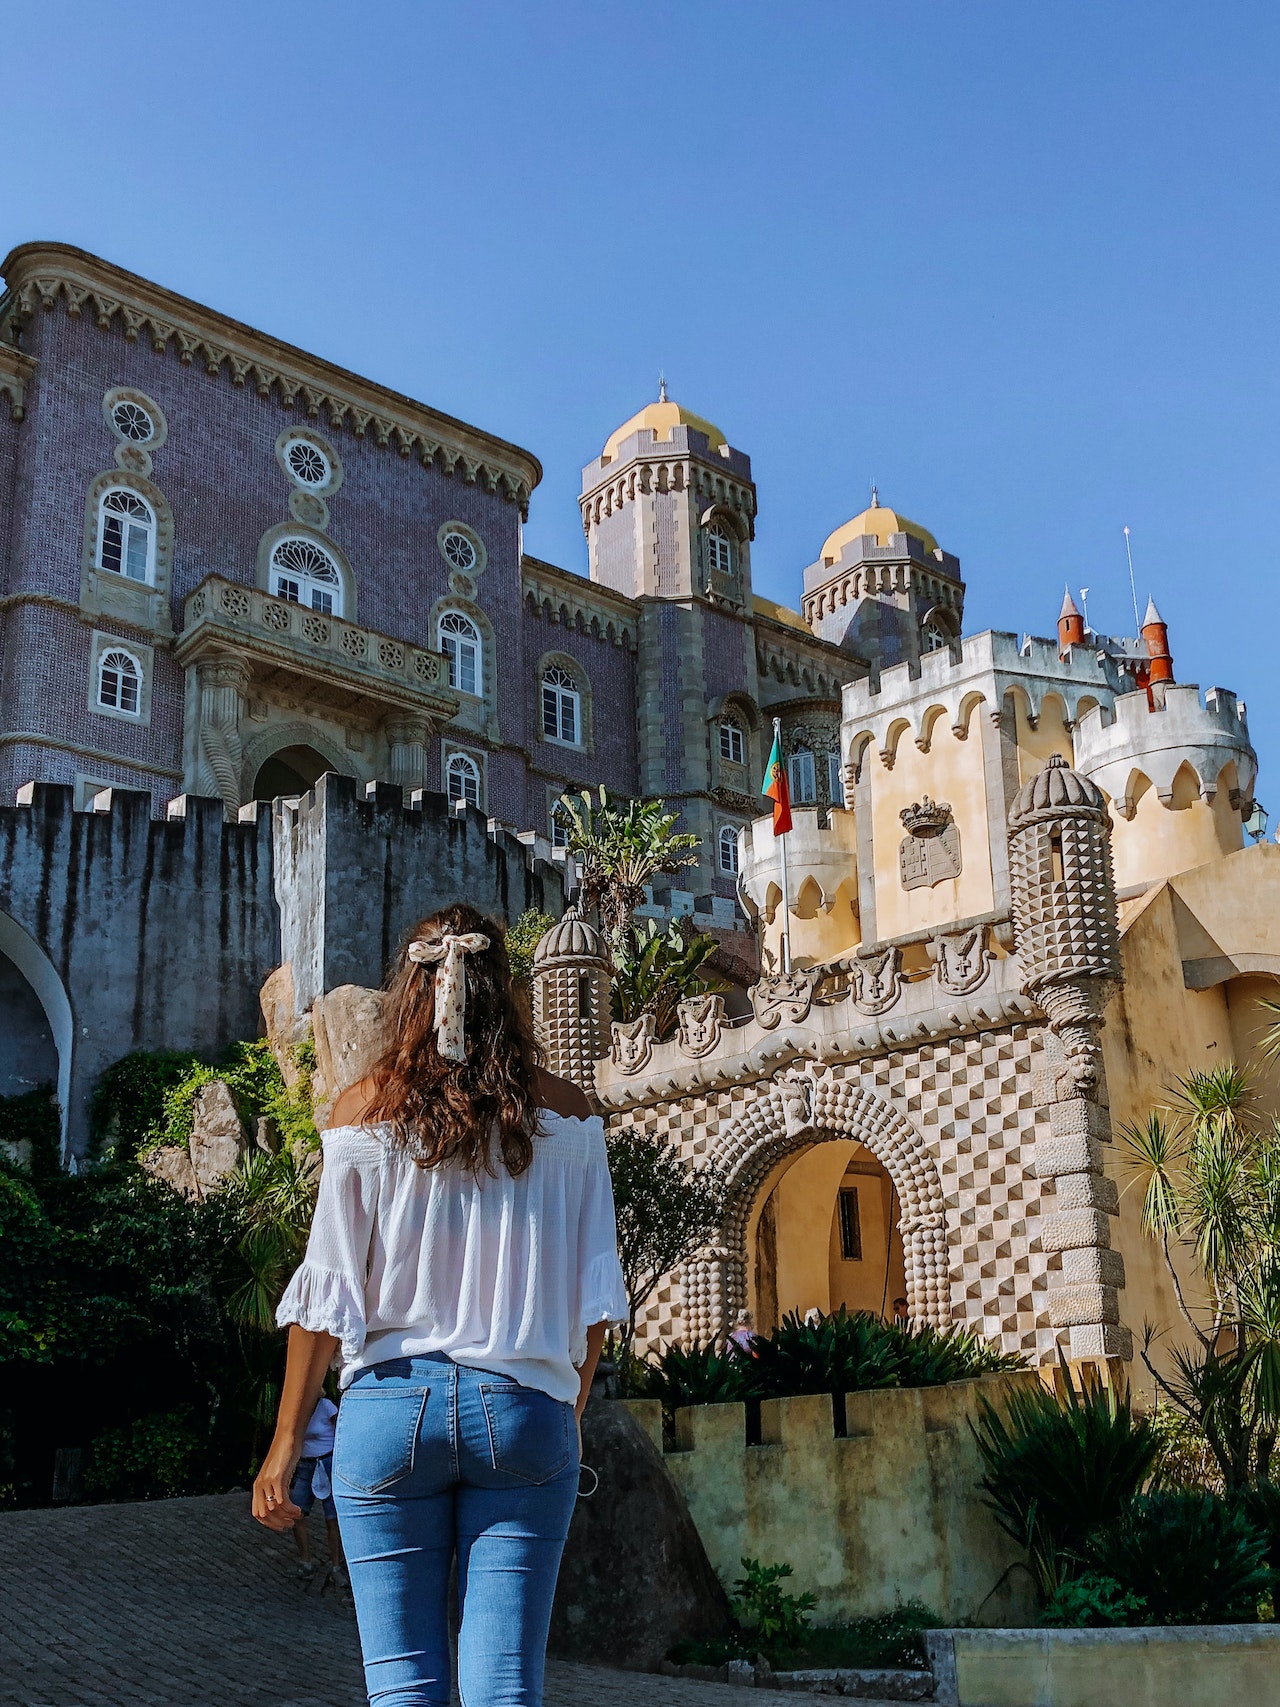 Pena Palace: A Must-Visit Destination in Portugal